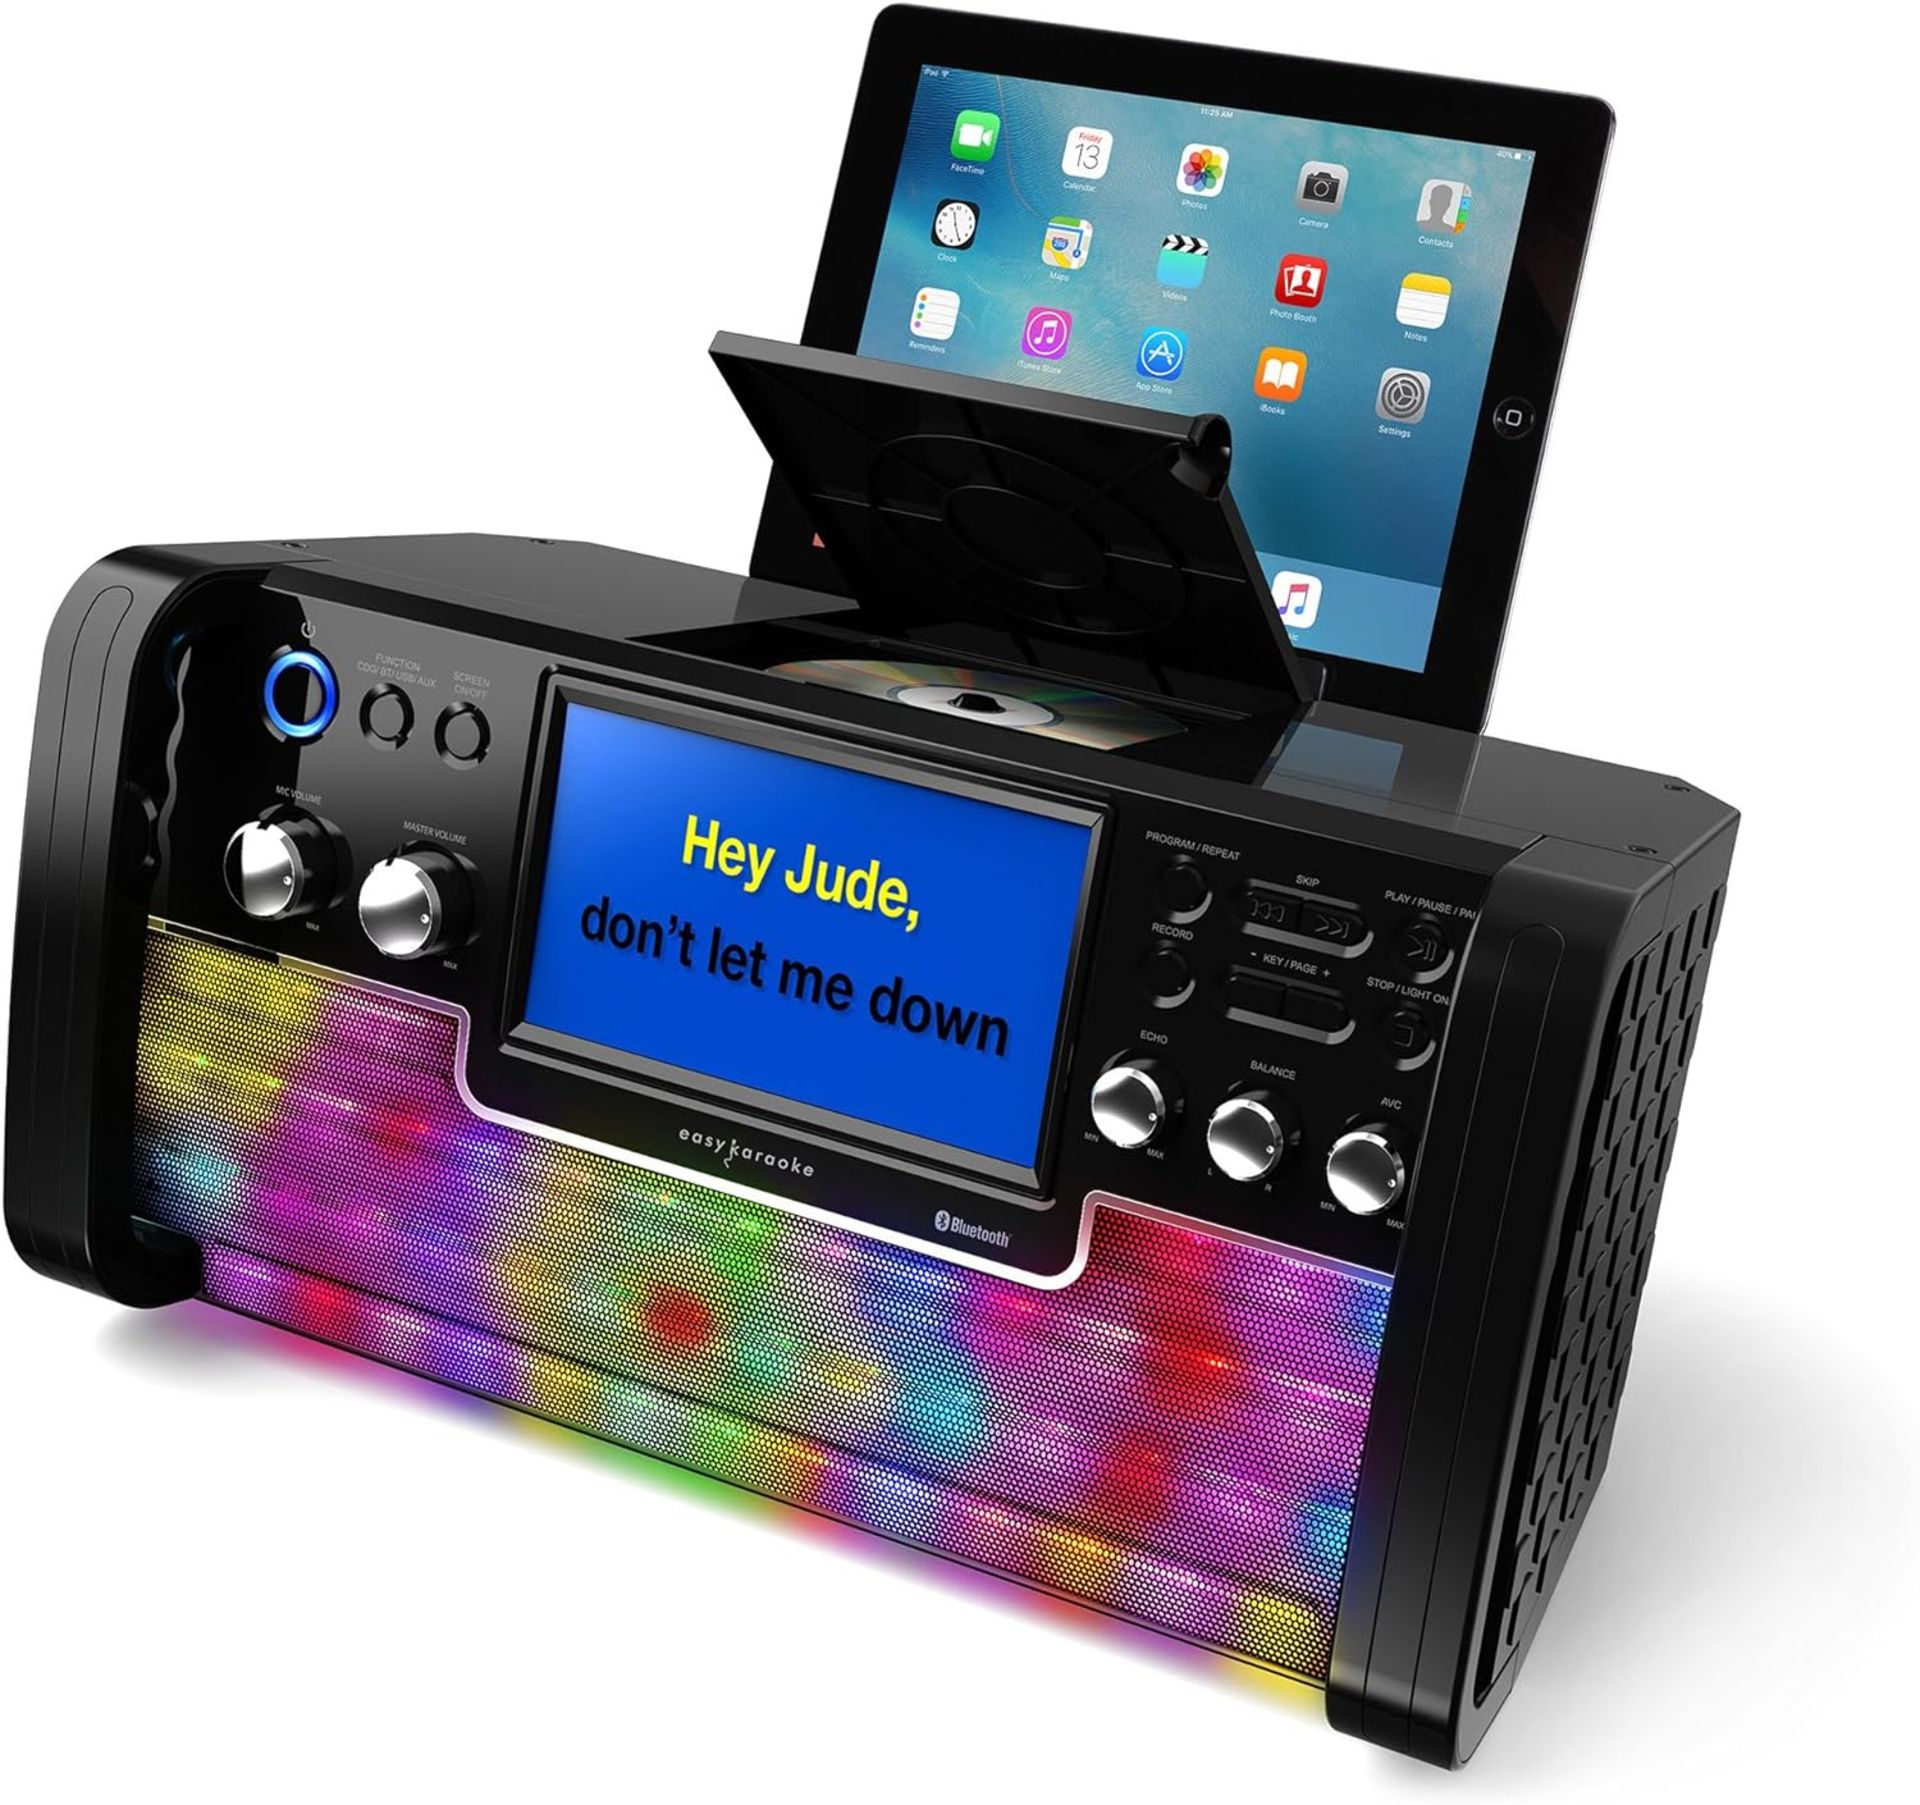 2 X EAASY KARAOKE BLUETOOTH CD AND GRAPHICS KARAOKE DISCO PARTY MACHINES WITH LIGHT EFFECTS RRP £109